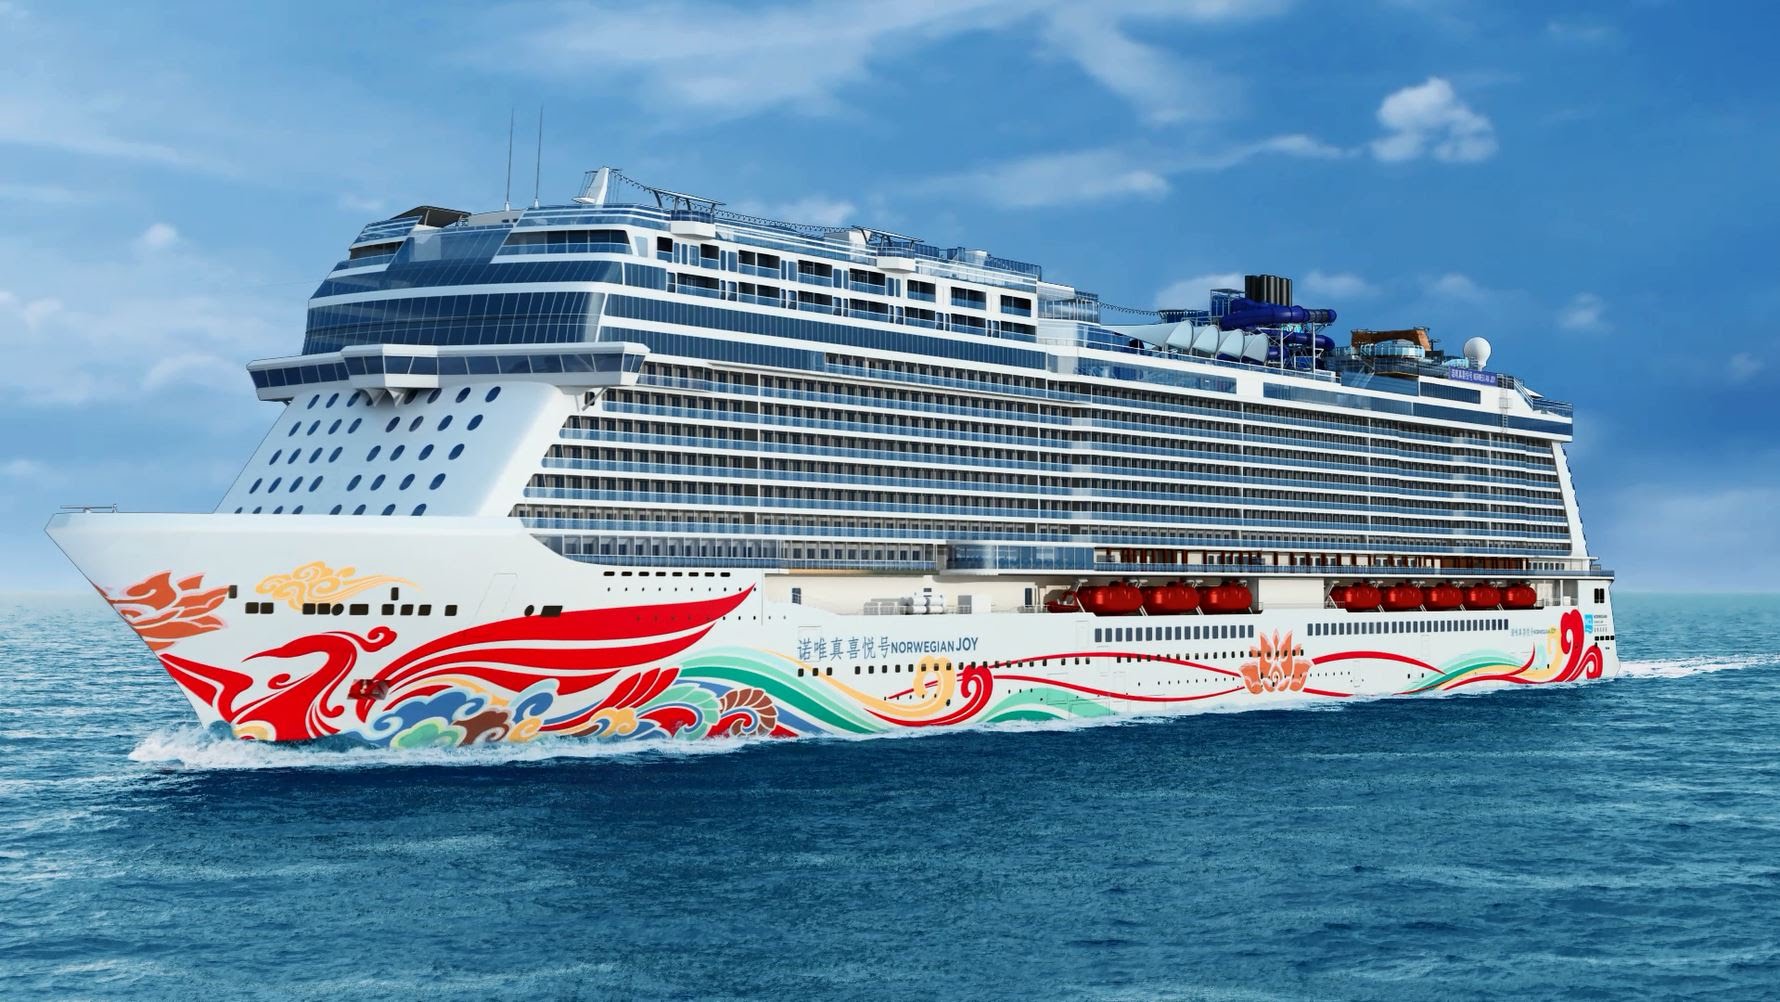 Norwegian Cruise Line Offers Free Airfare For Cruises to Top Destinations